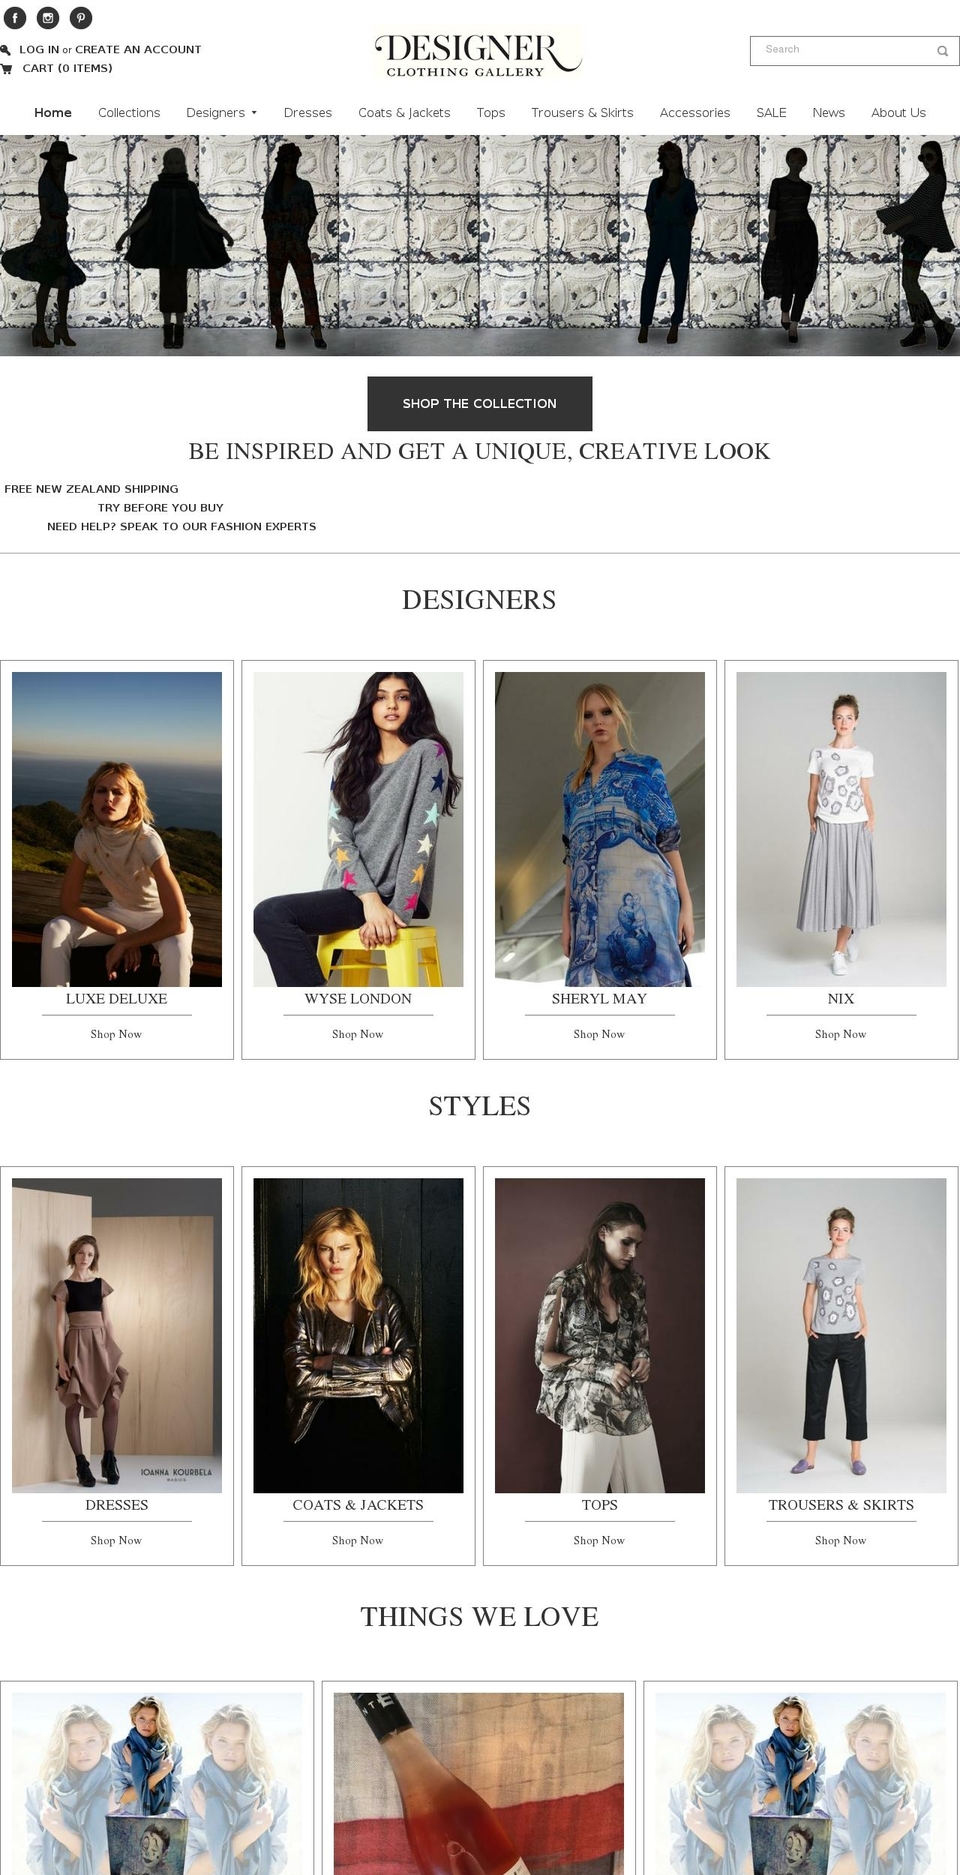 Designer Clothing Gallery (with laybuy) Shopify theme site example designerclothinggallery.com